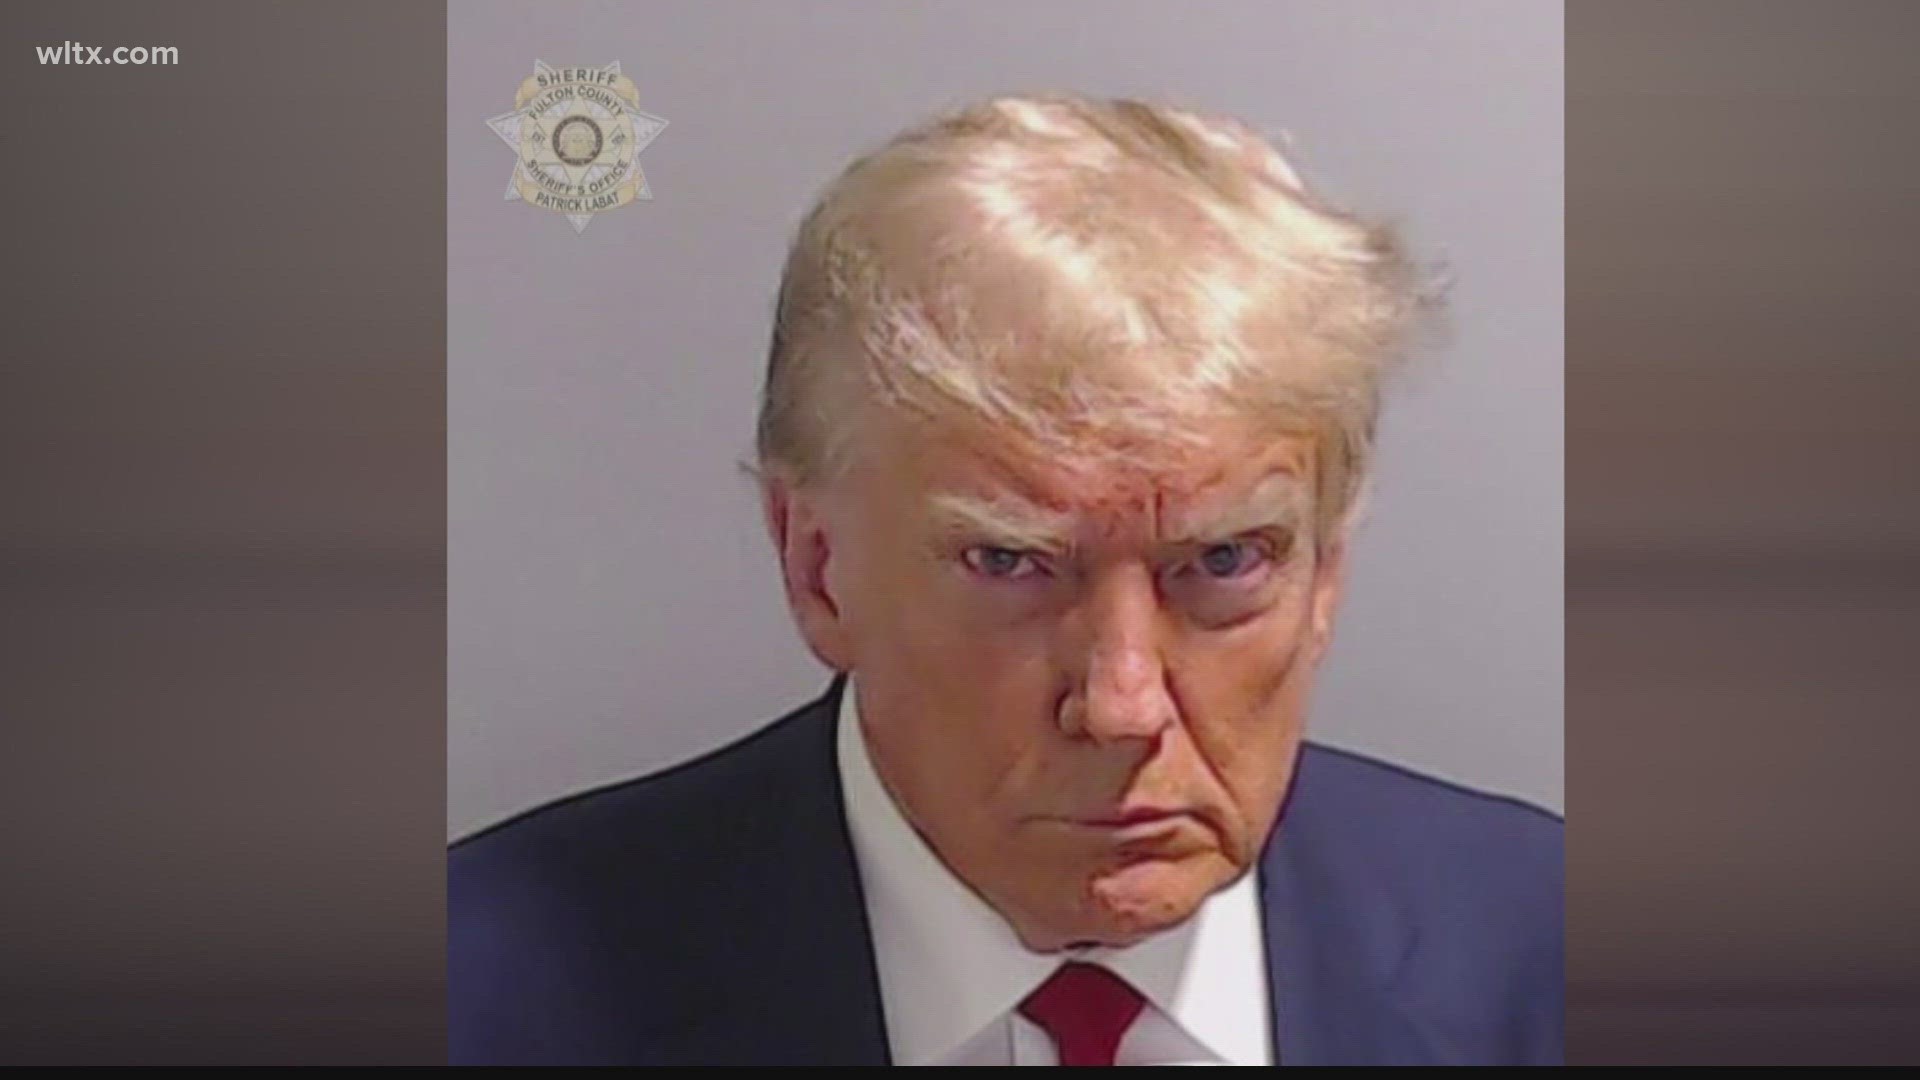 It was a brisk 20-minute booking that yielded a historic first: a mug shot of a U.S. ex-president.